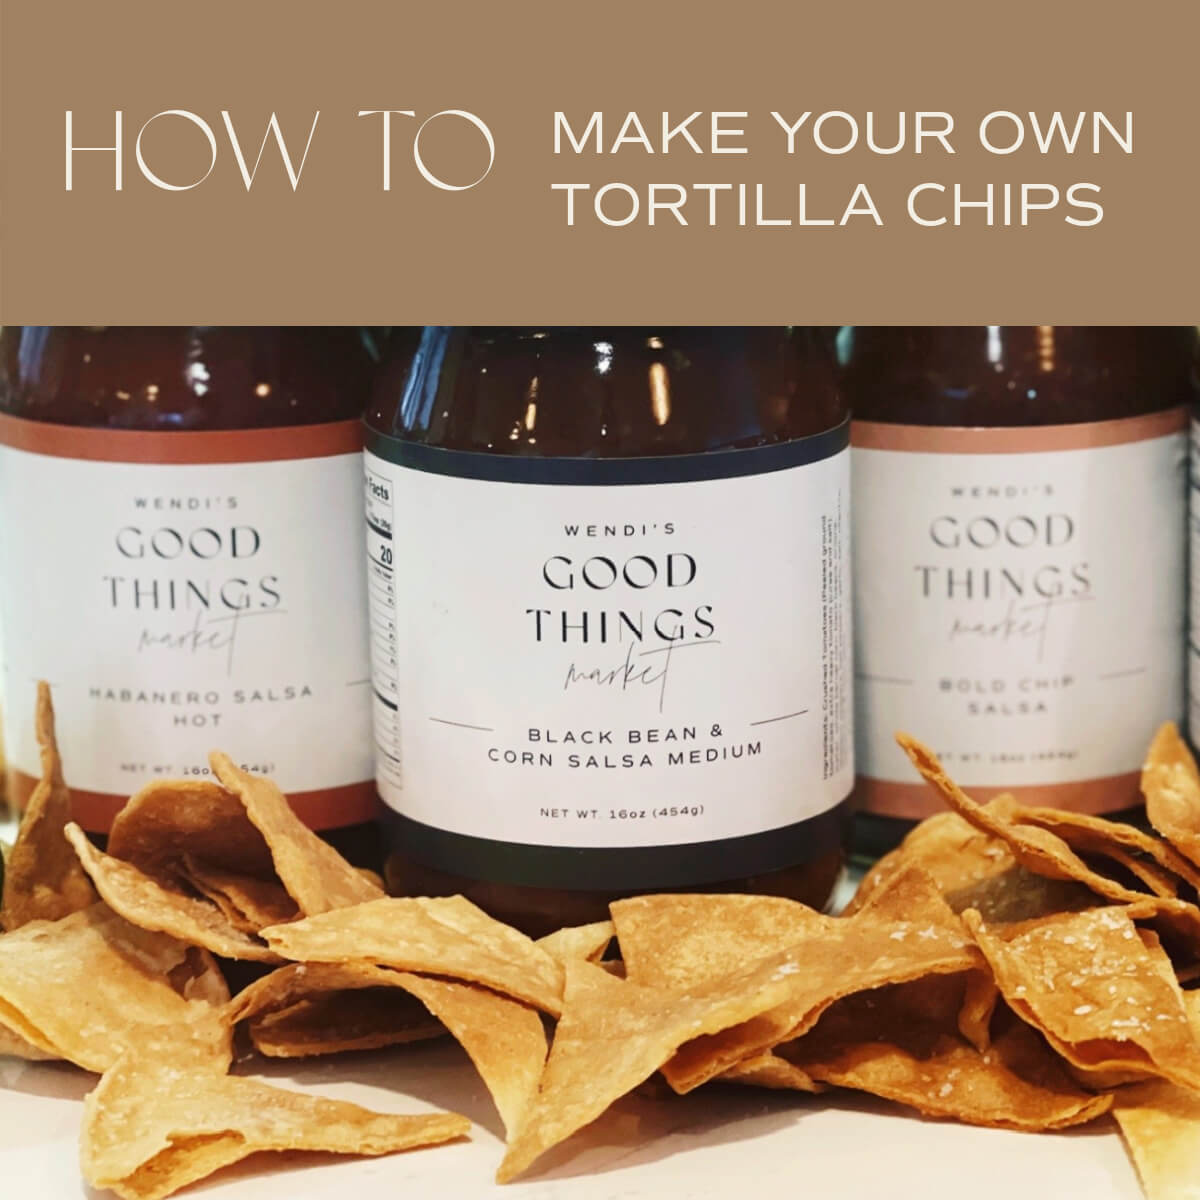 Make Your Own Tortilla Chips At Home